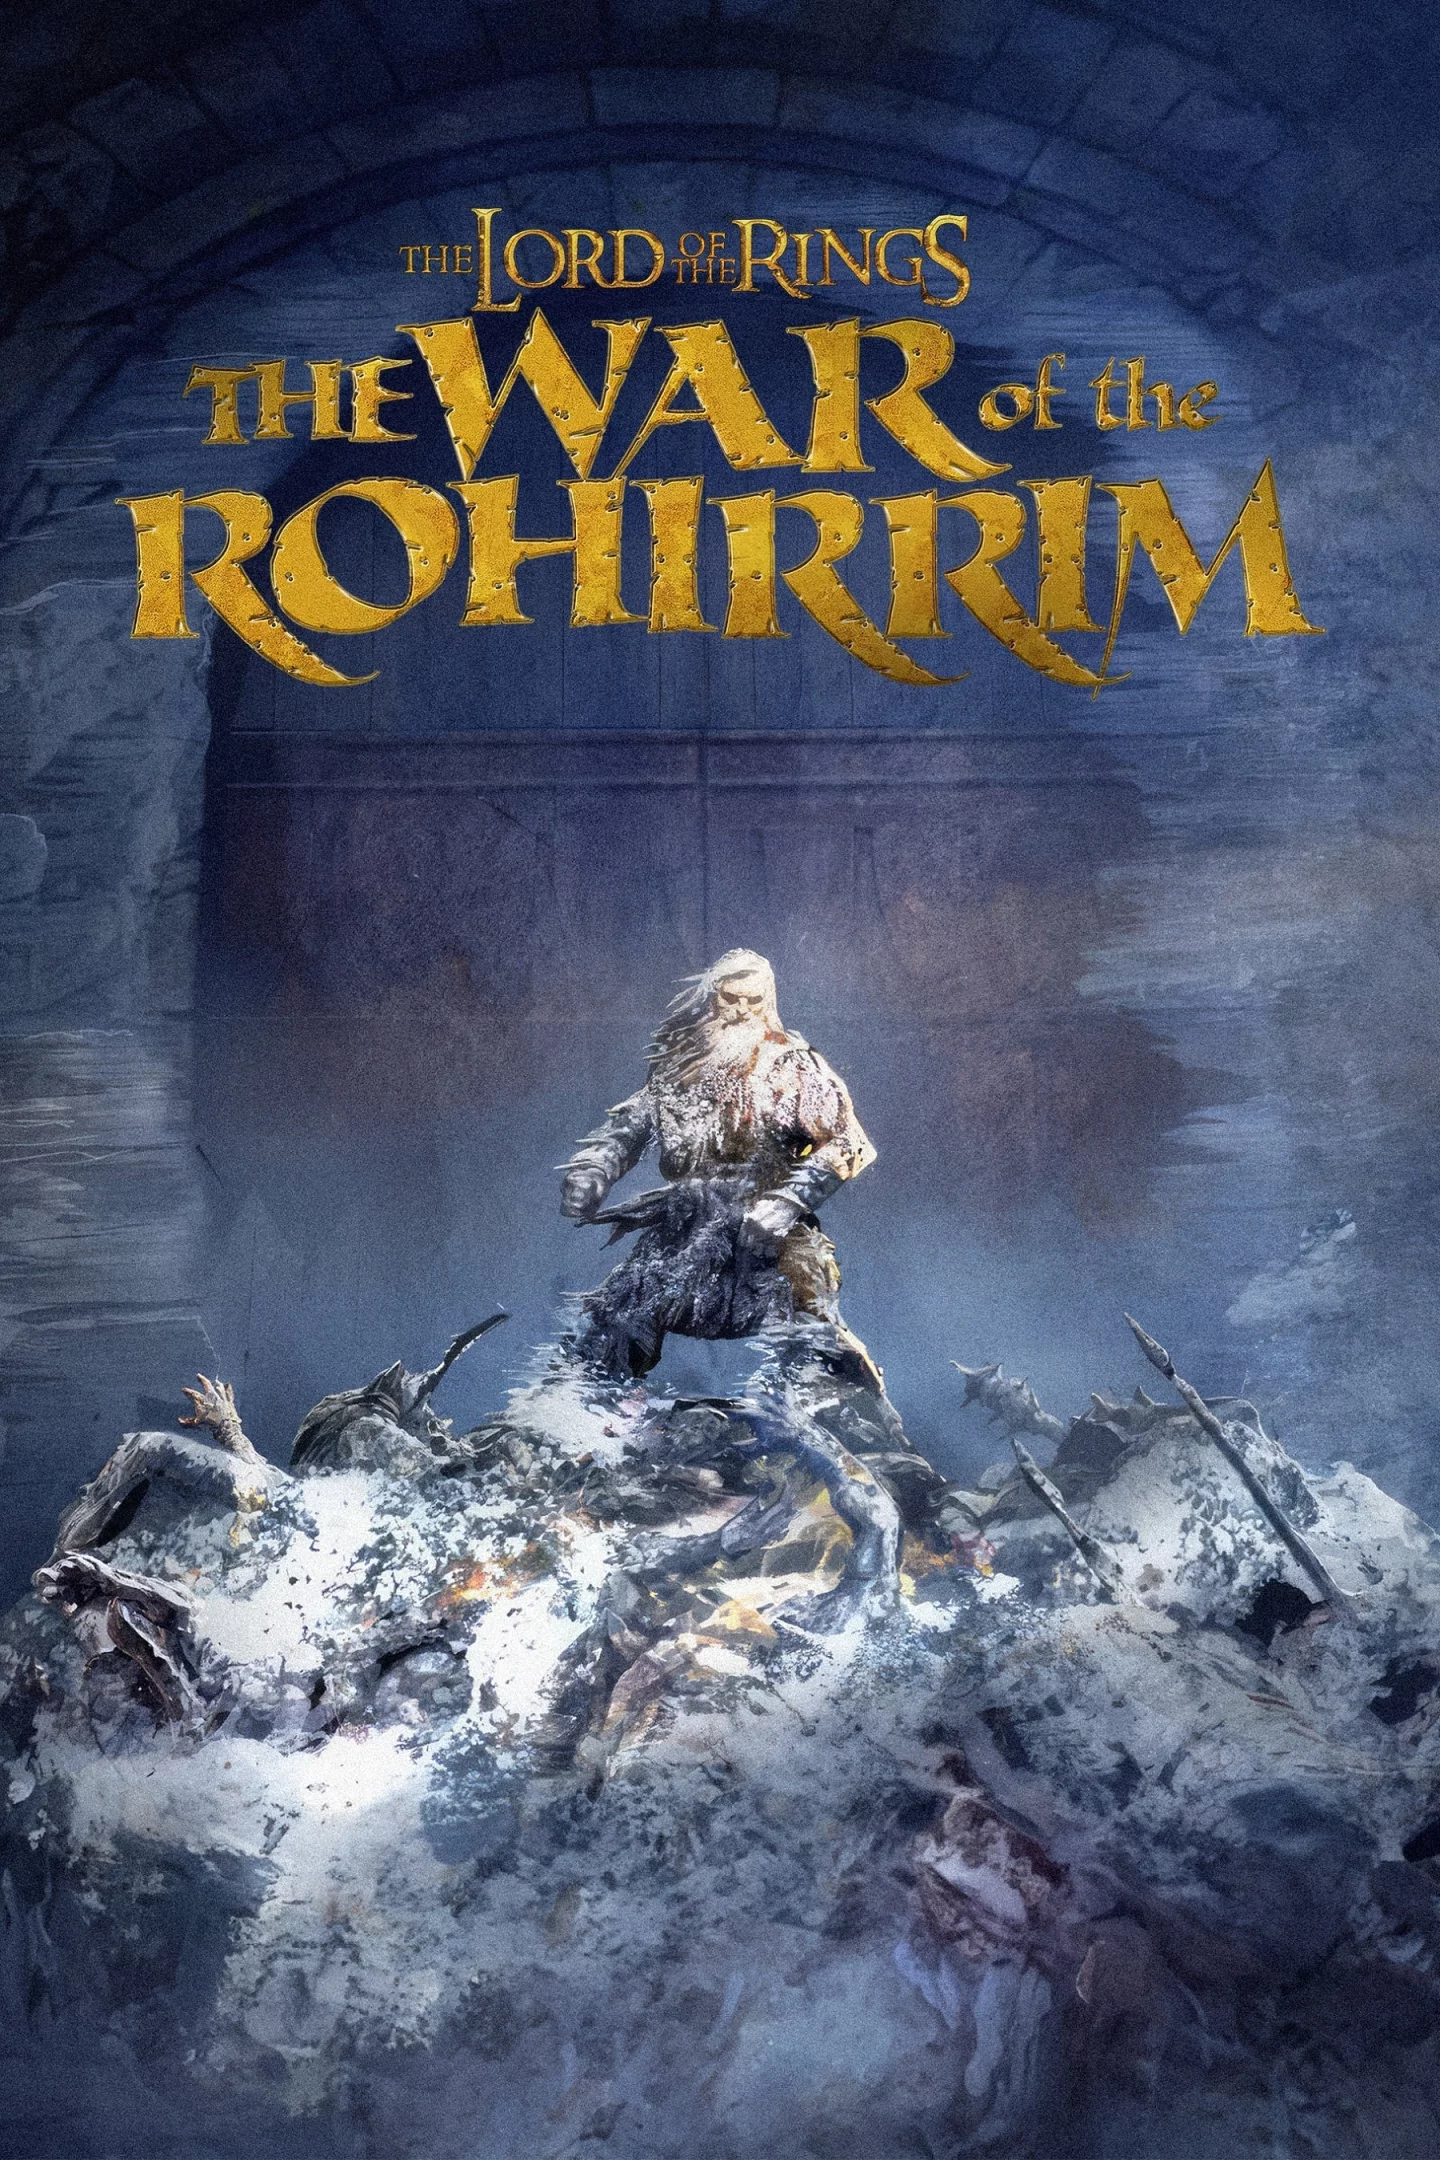 Photo 6 du film : The Lord of the Rings : The War of the Rohirrim